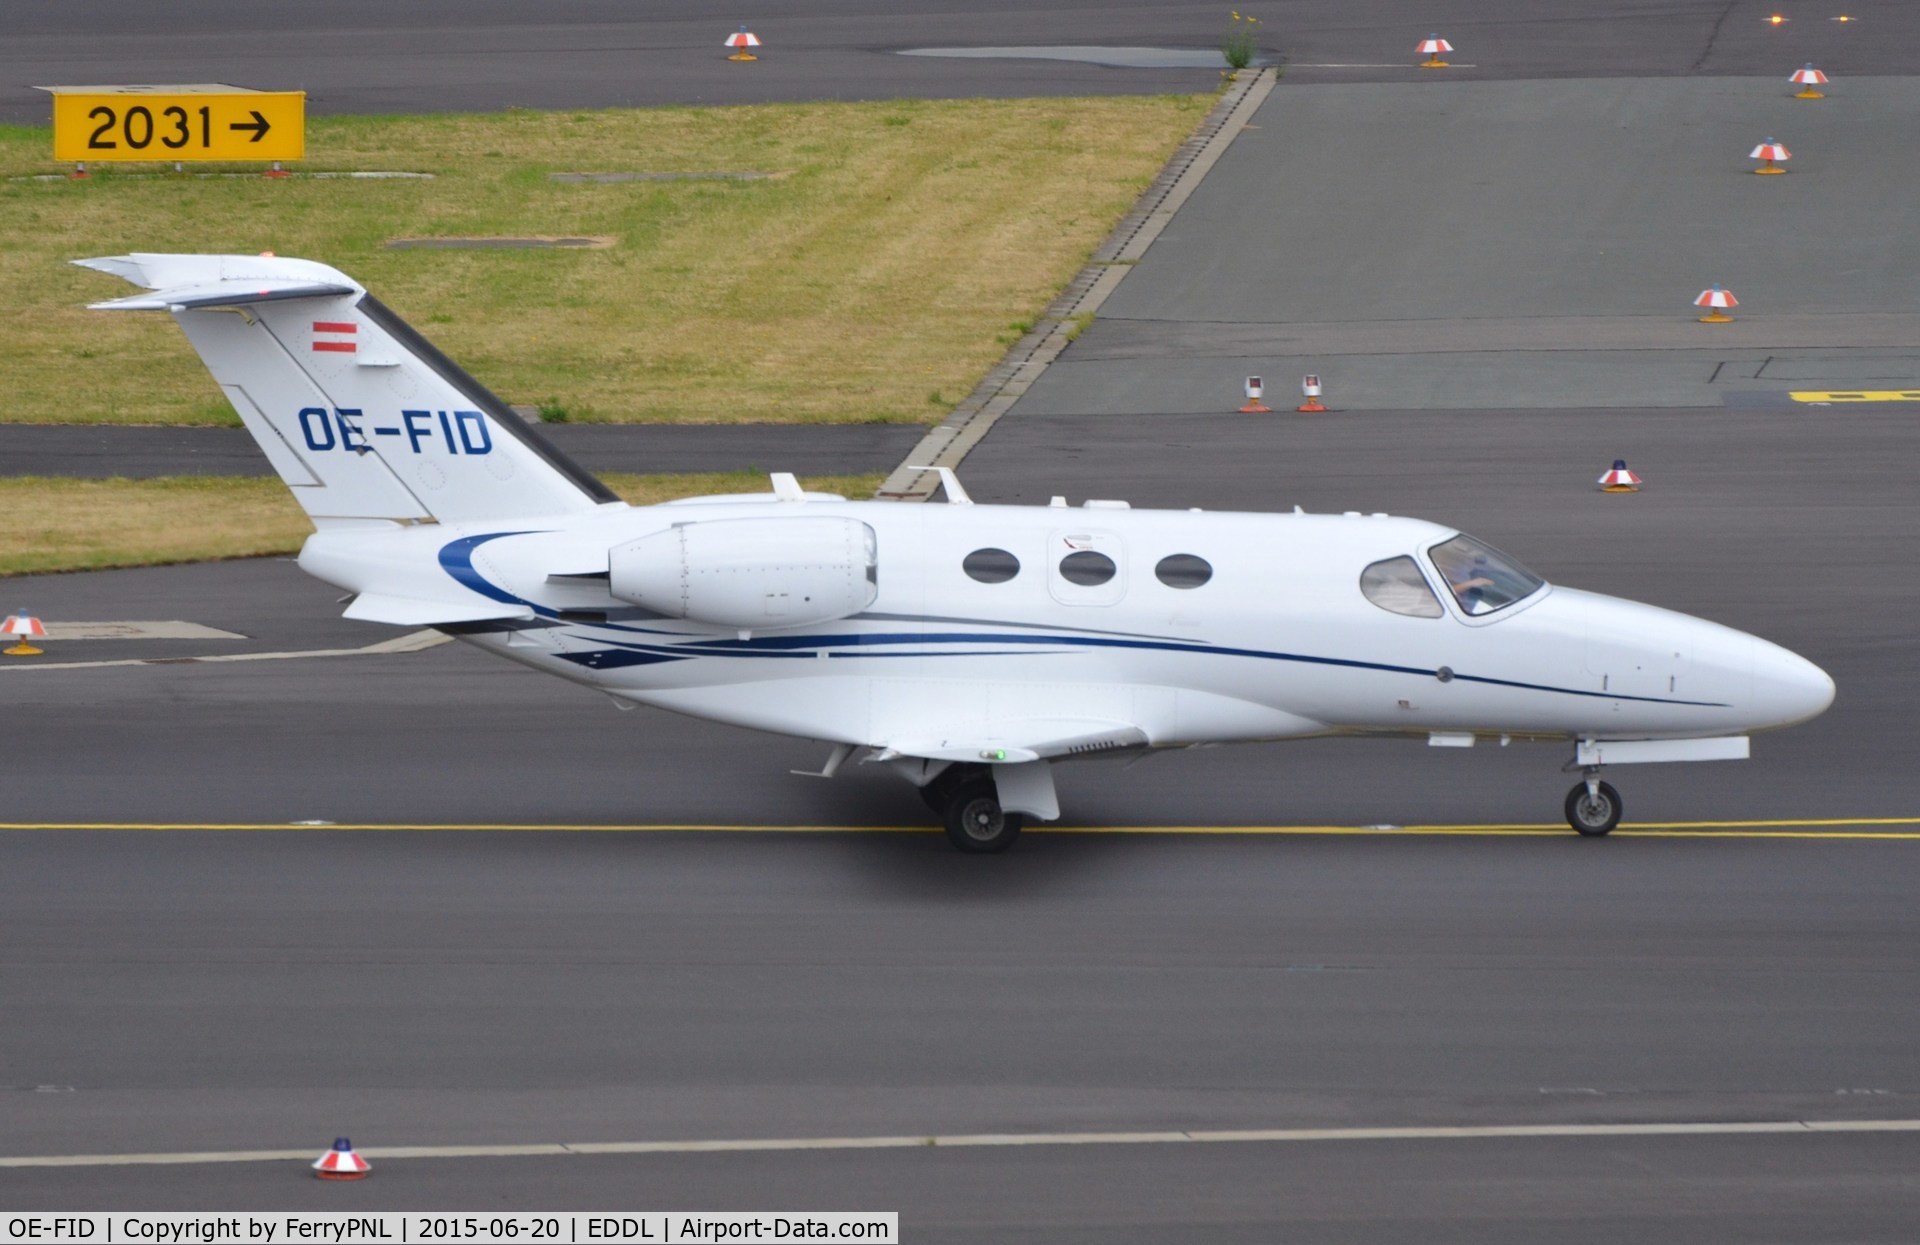 OE-FID, 2007 Cessna 510 Citation Mustang Citation Mustang C/N 510-0040, Mustang taxying out